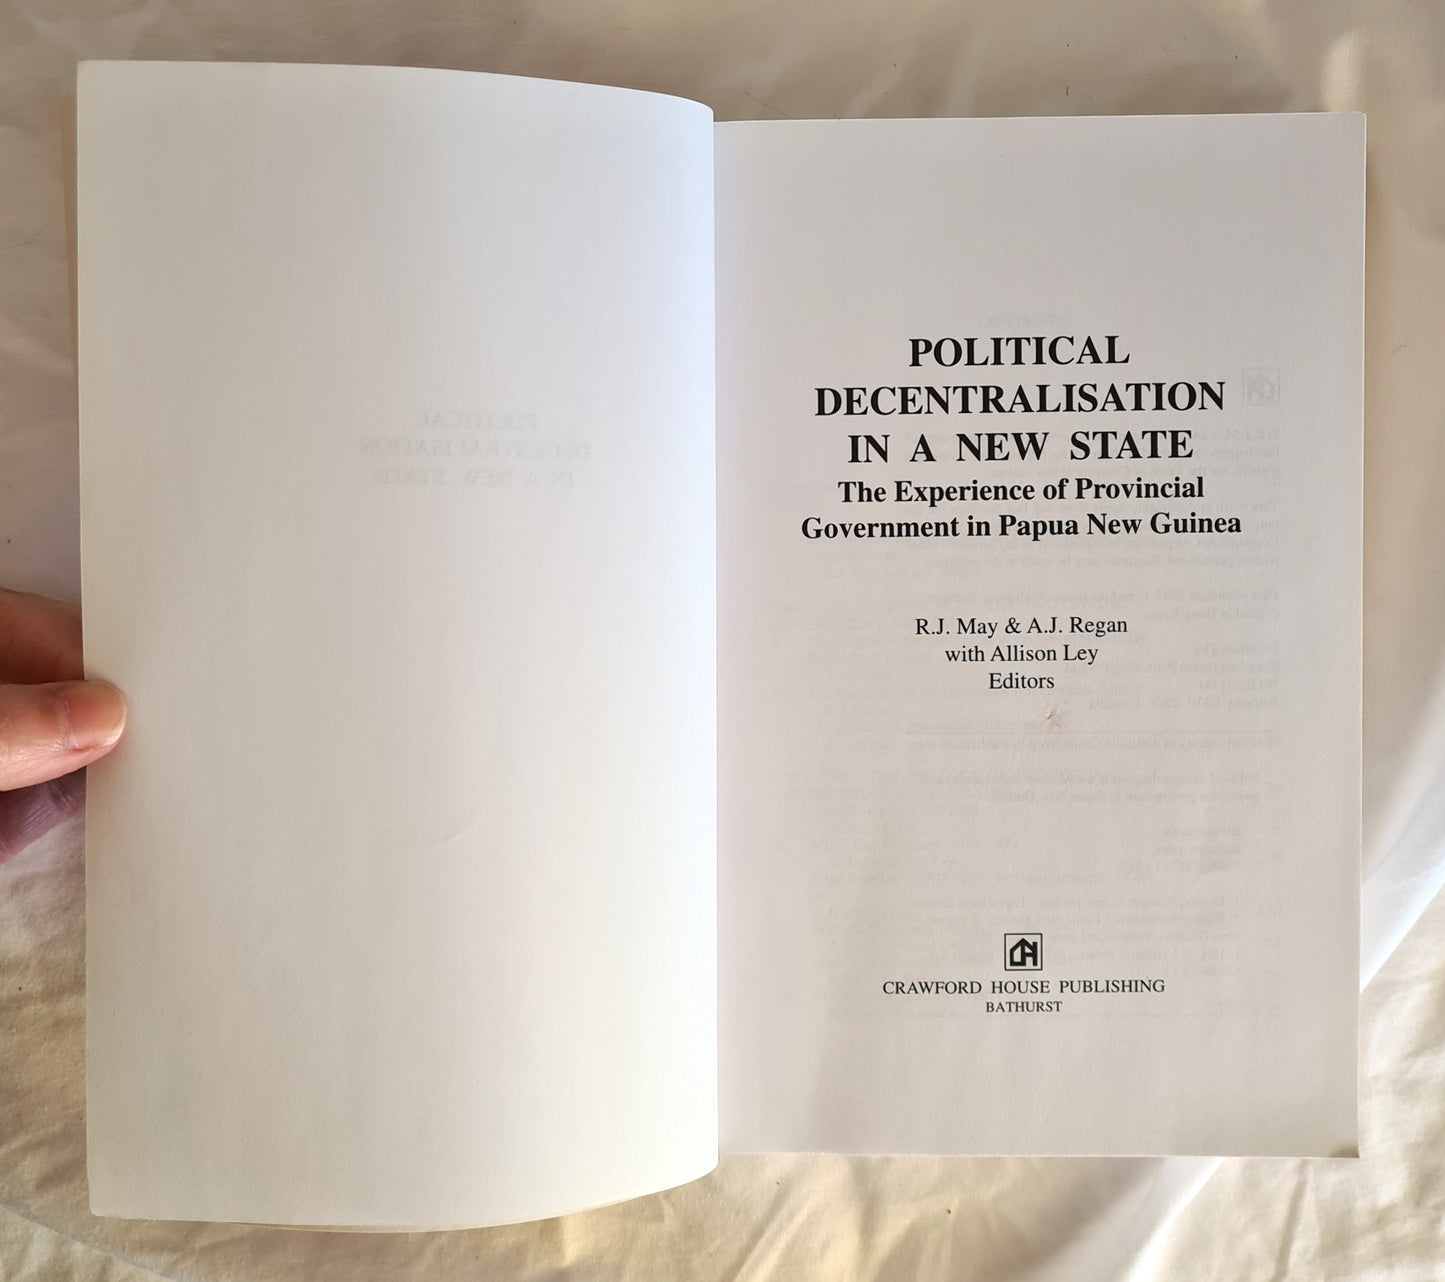 Political Decentralisation in a New State by R. J. May and A. J. Regan